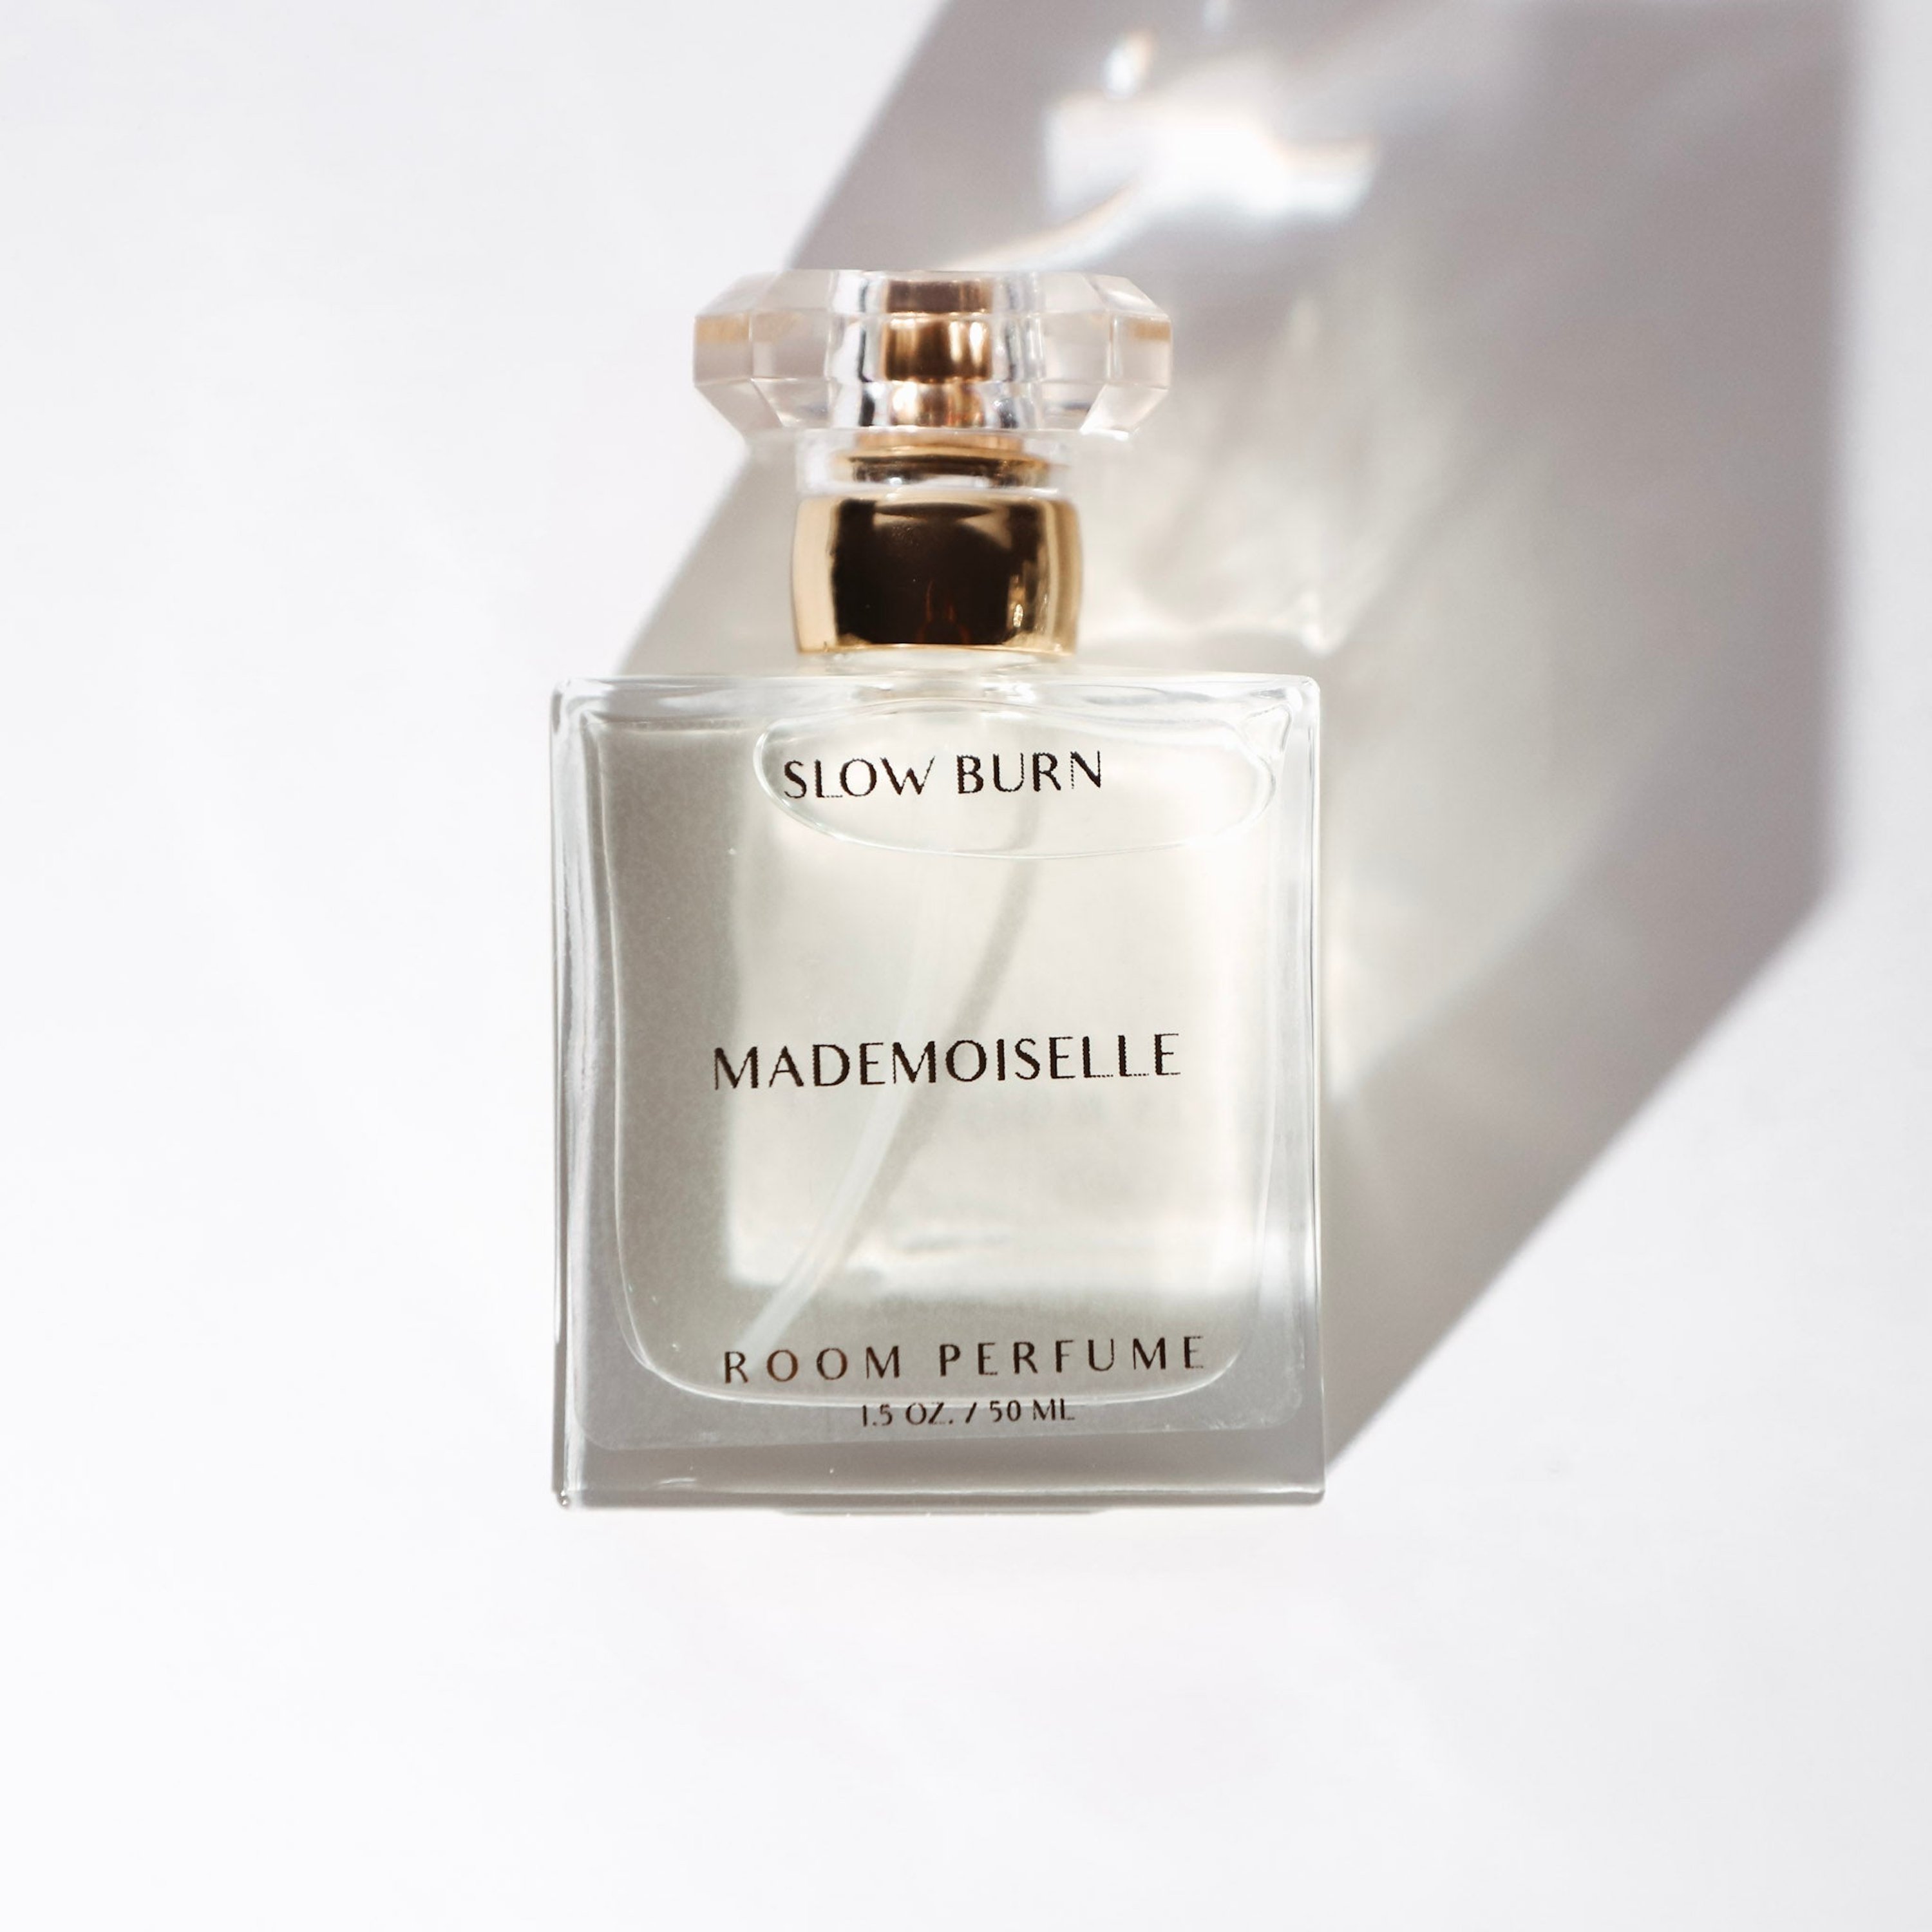 Chanel Mademoiselle Room Perfume In Neutrals